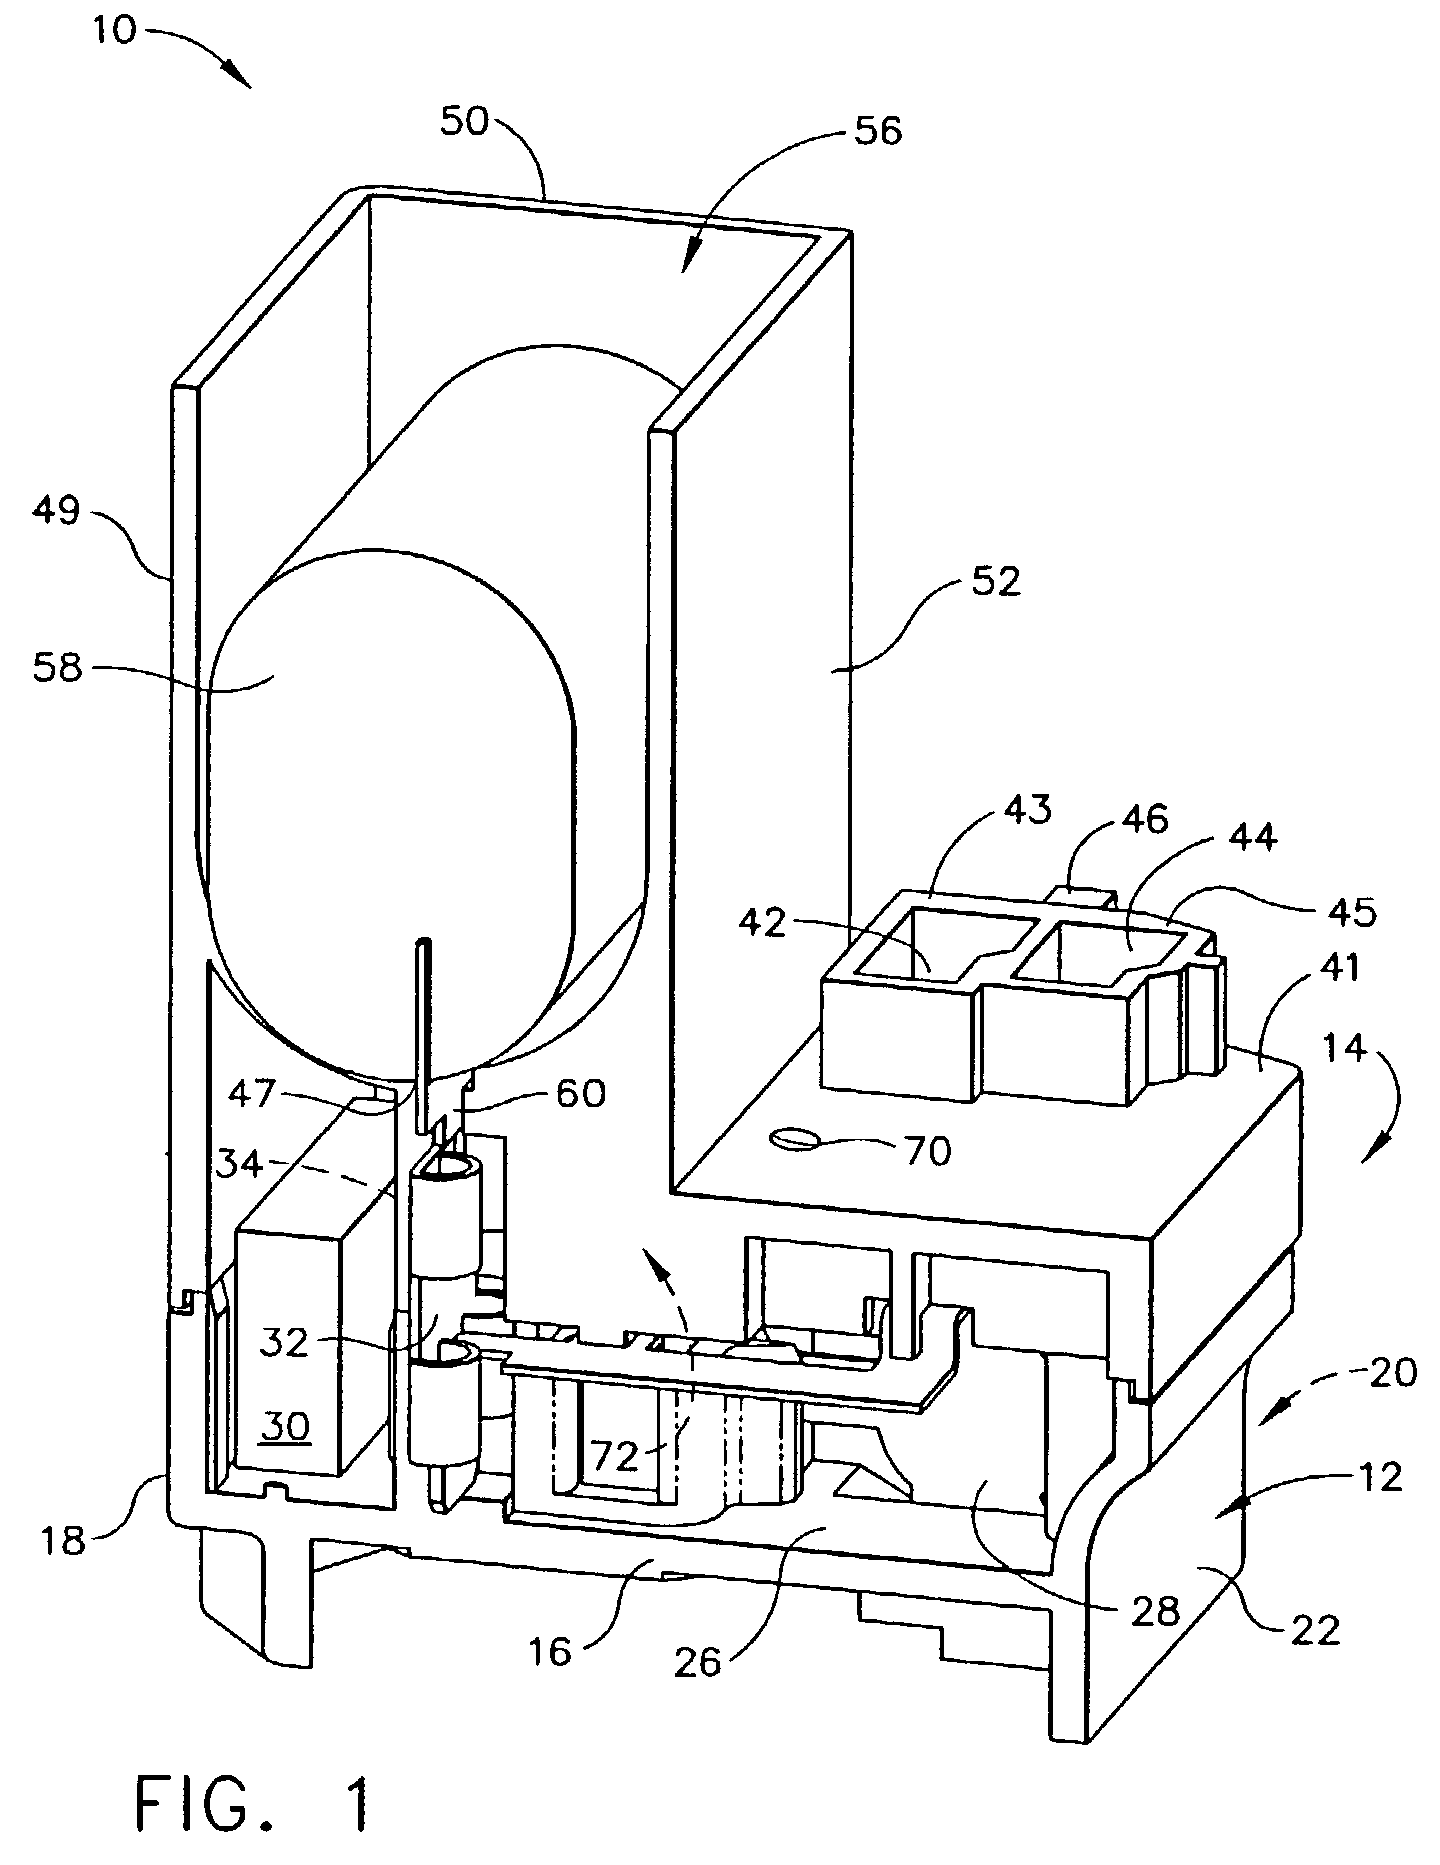 Method and apparatus for combining PTCR/OL and run capacitor